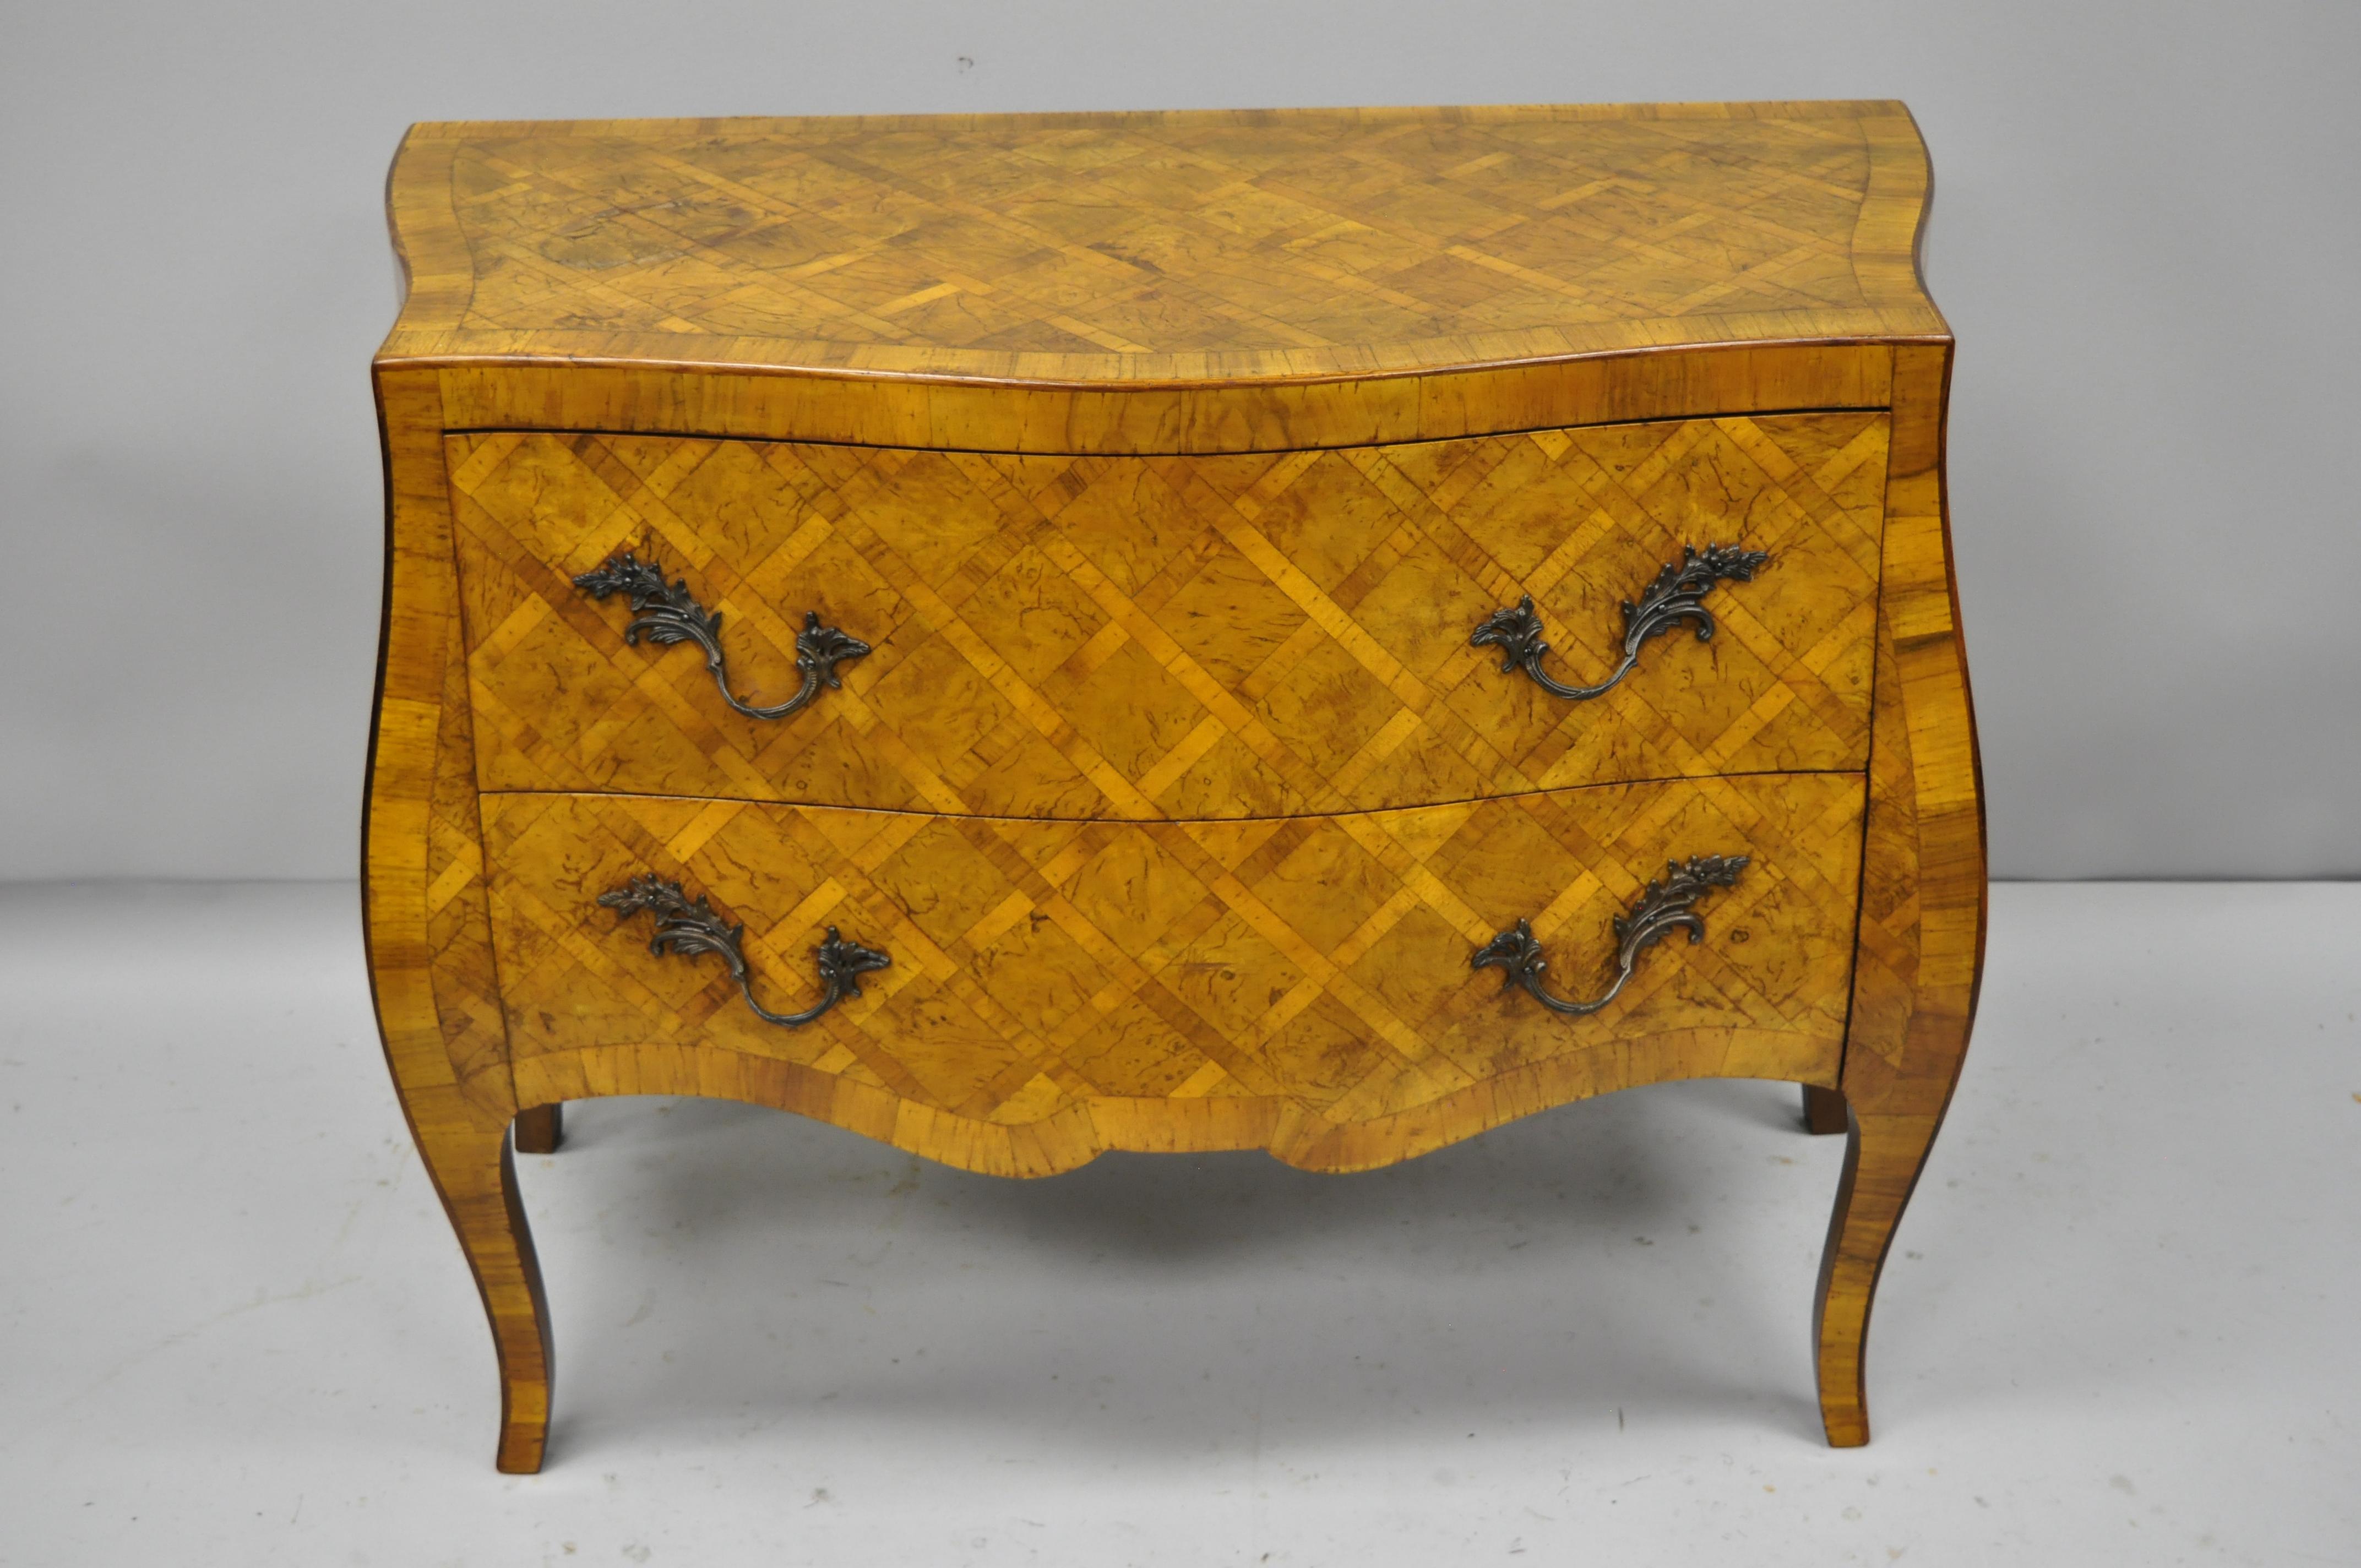 Italian burl olive wood parquetry inlaid French style bombe commode chest. Item features beautiful parquetry inlaid burl olive wood, shapely bombe form, original label, cabriole legs, great style and form, circa early to mid-20th century.